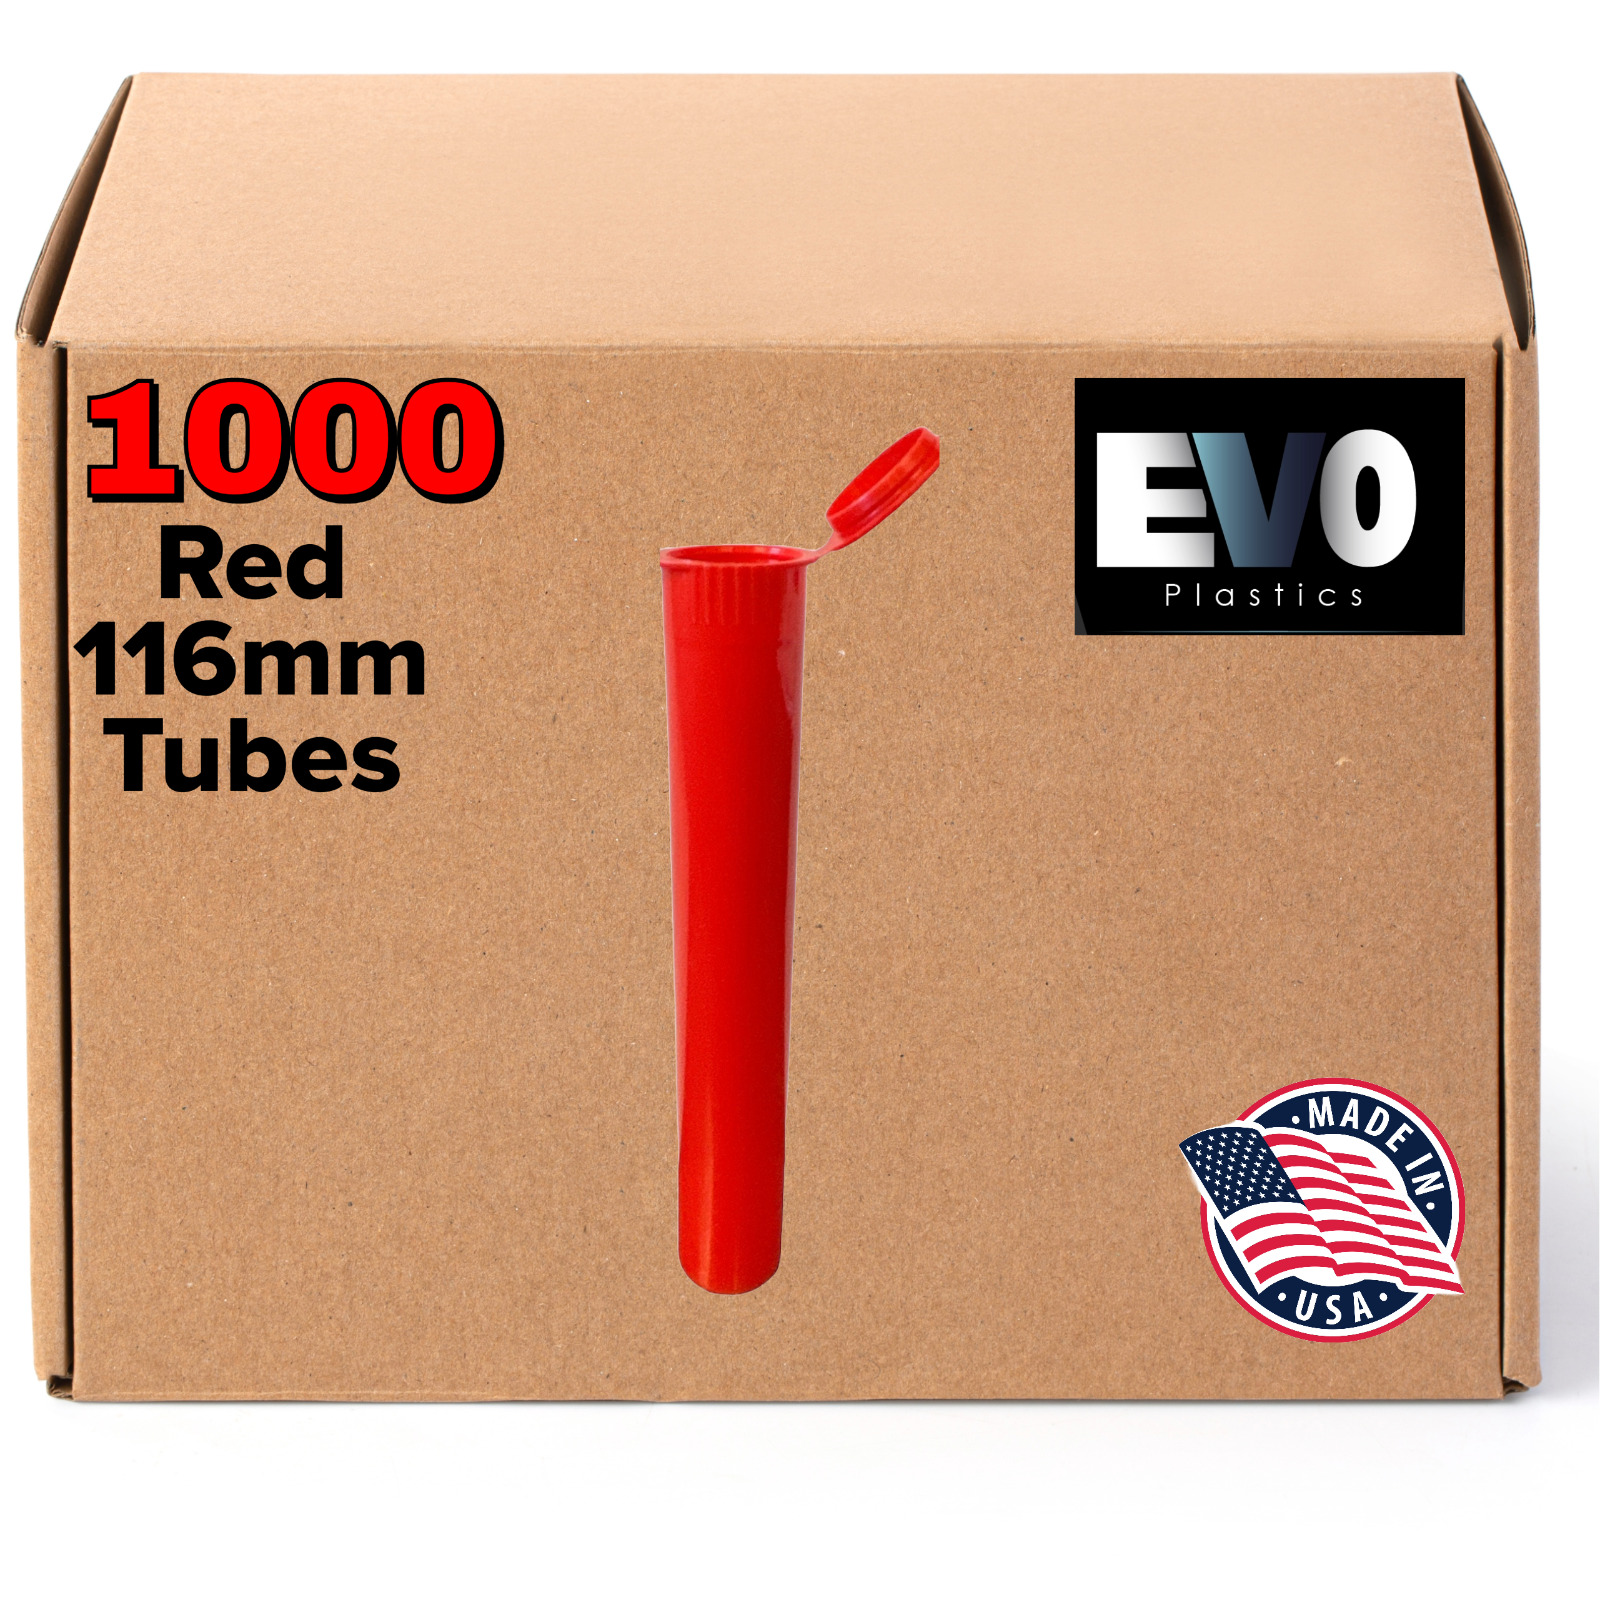 116mm Tubes - Red - 1000 count , Pop Top Joints, BPA-Free Pre-Roll - USA Made